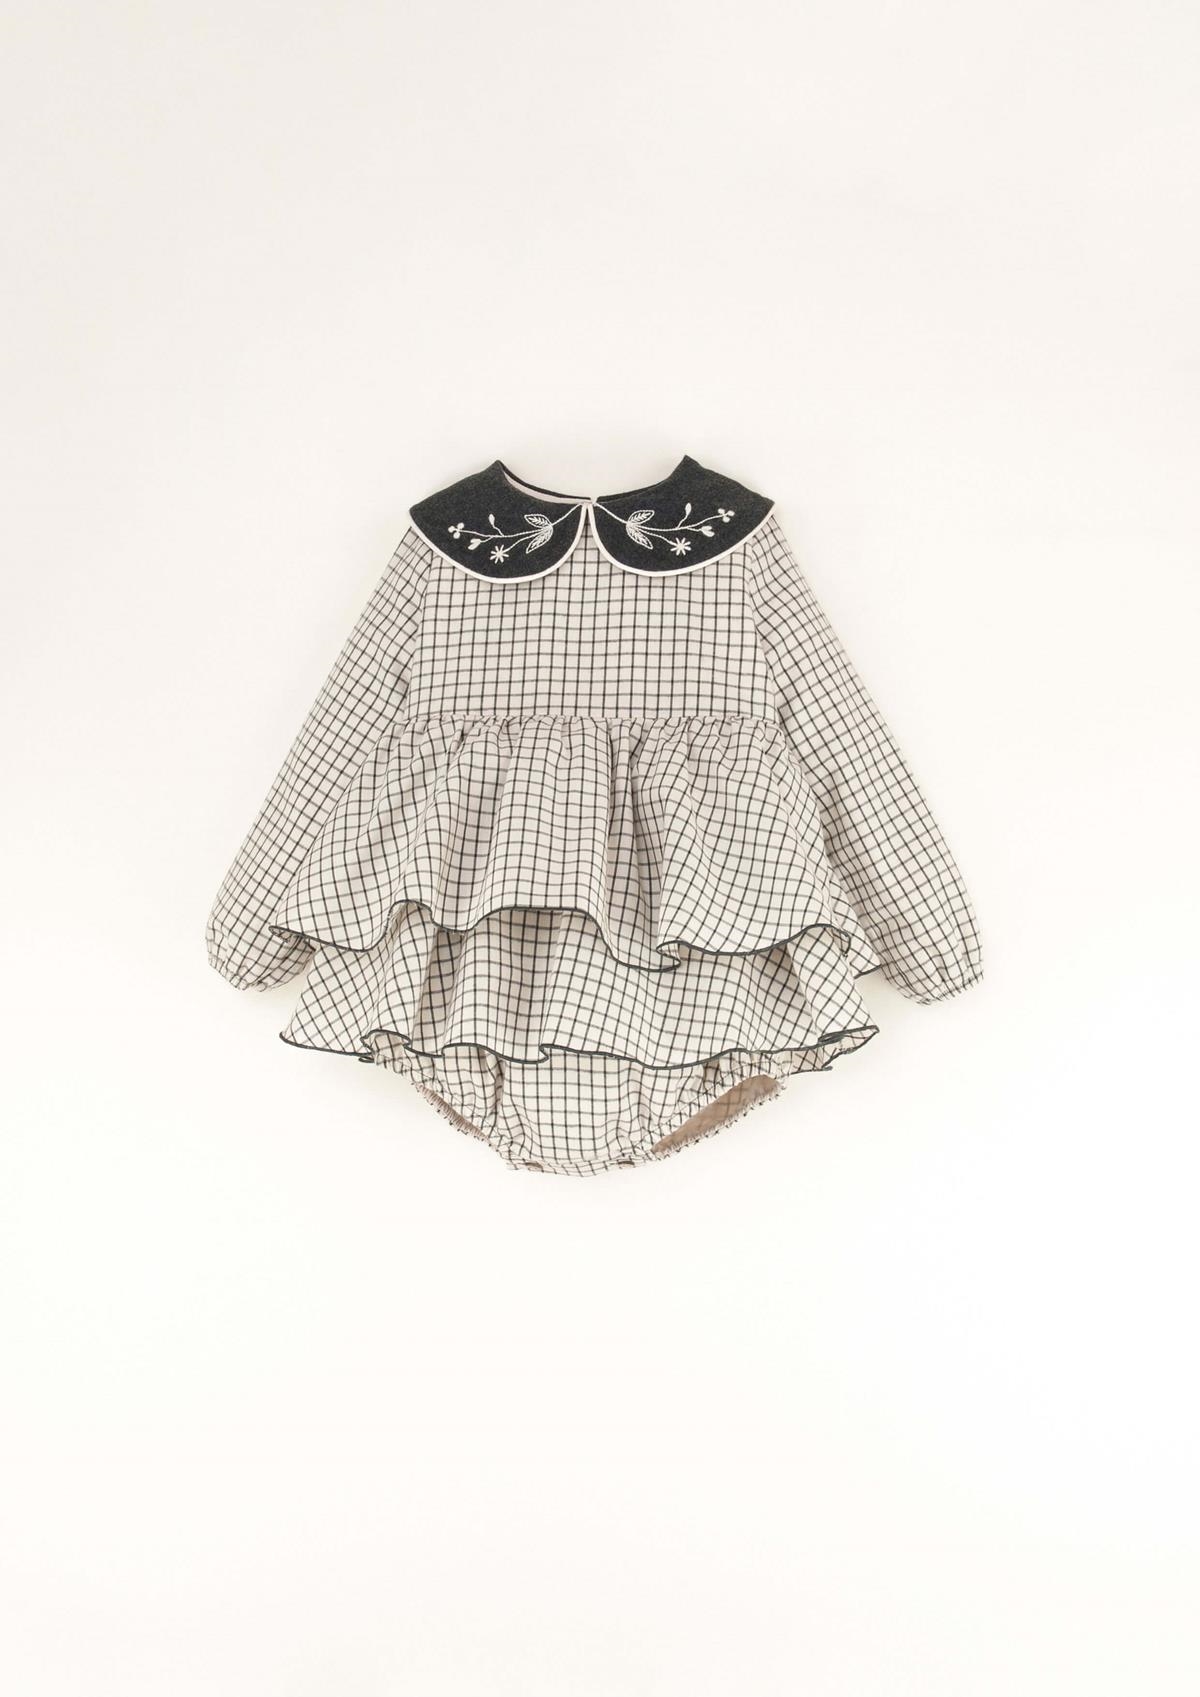 Mod.2.3 Off-white check romper suit with frill | AW23.24 Mod.2.3 Off-white check romper suit with frill